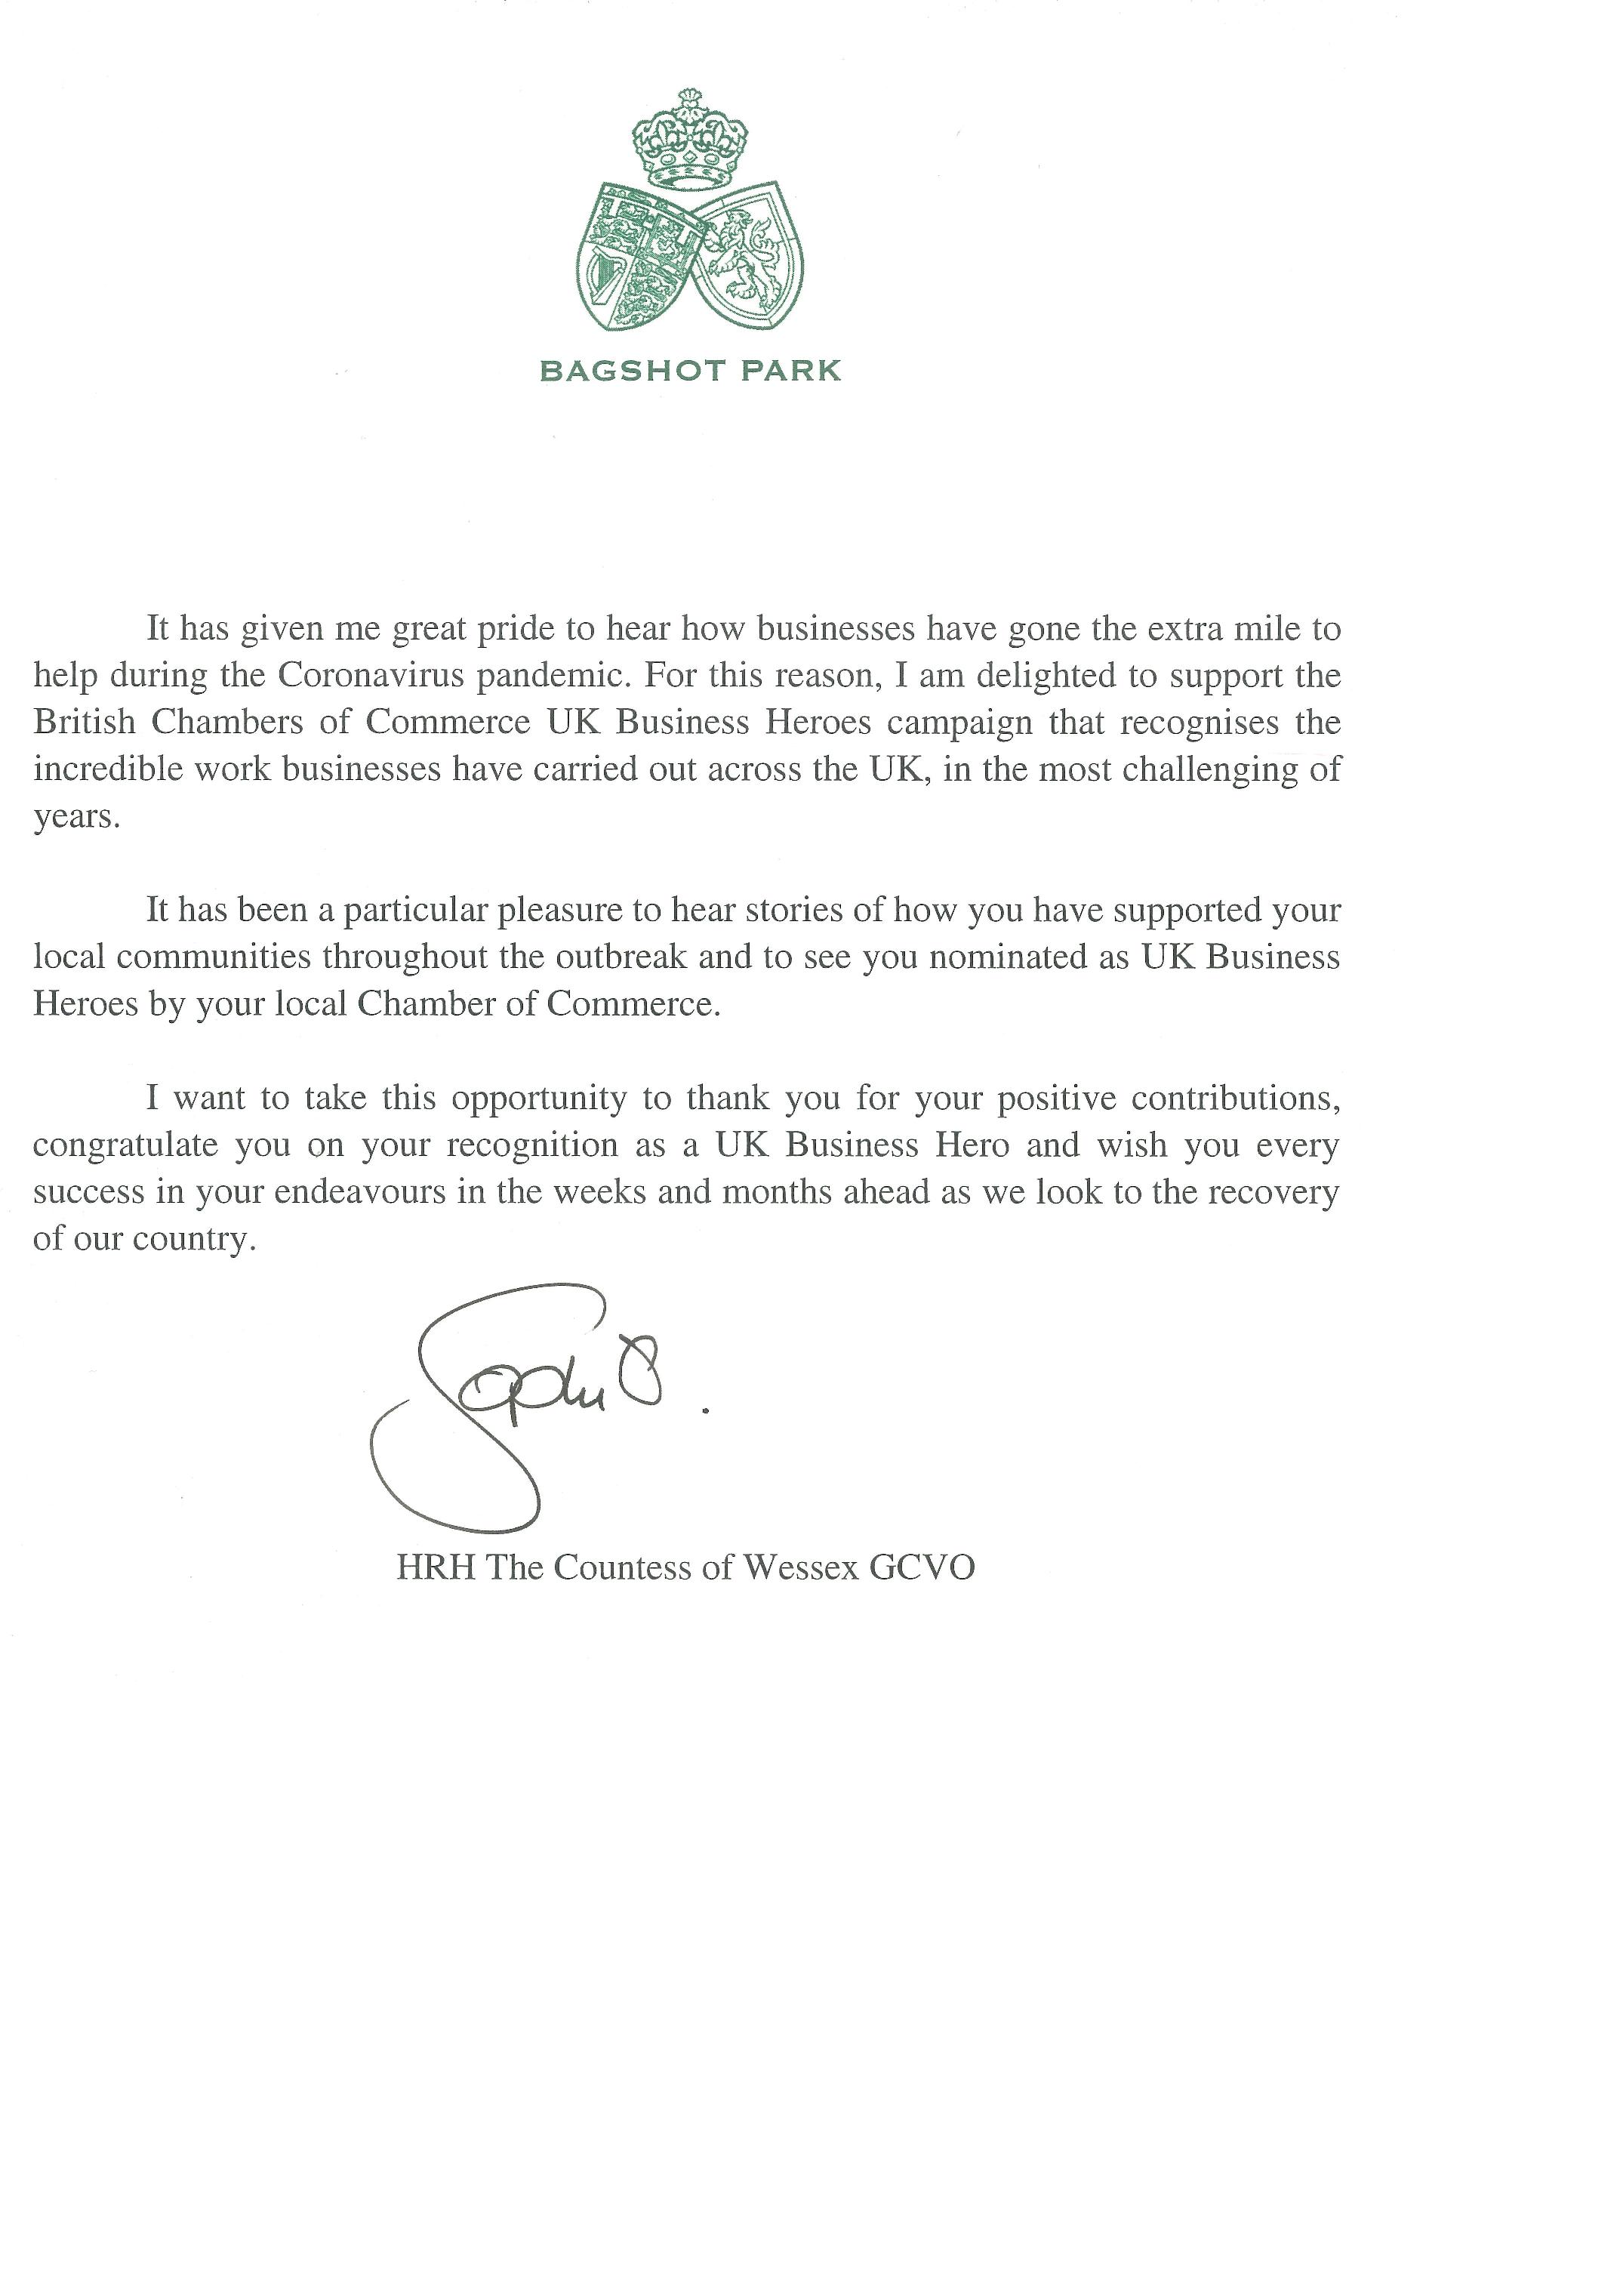  HRH_The_Countess_of_Wessex_GCVO_Letter-page-001_(1).jpg